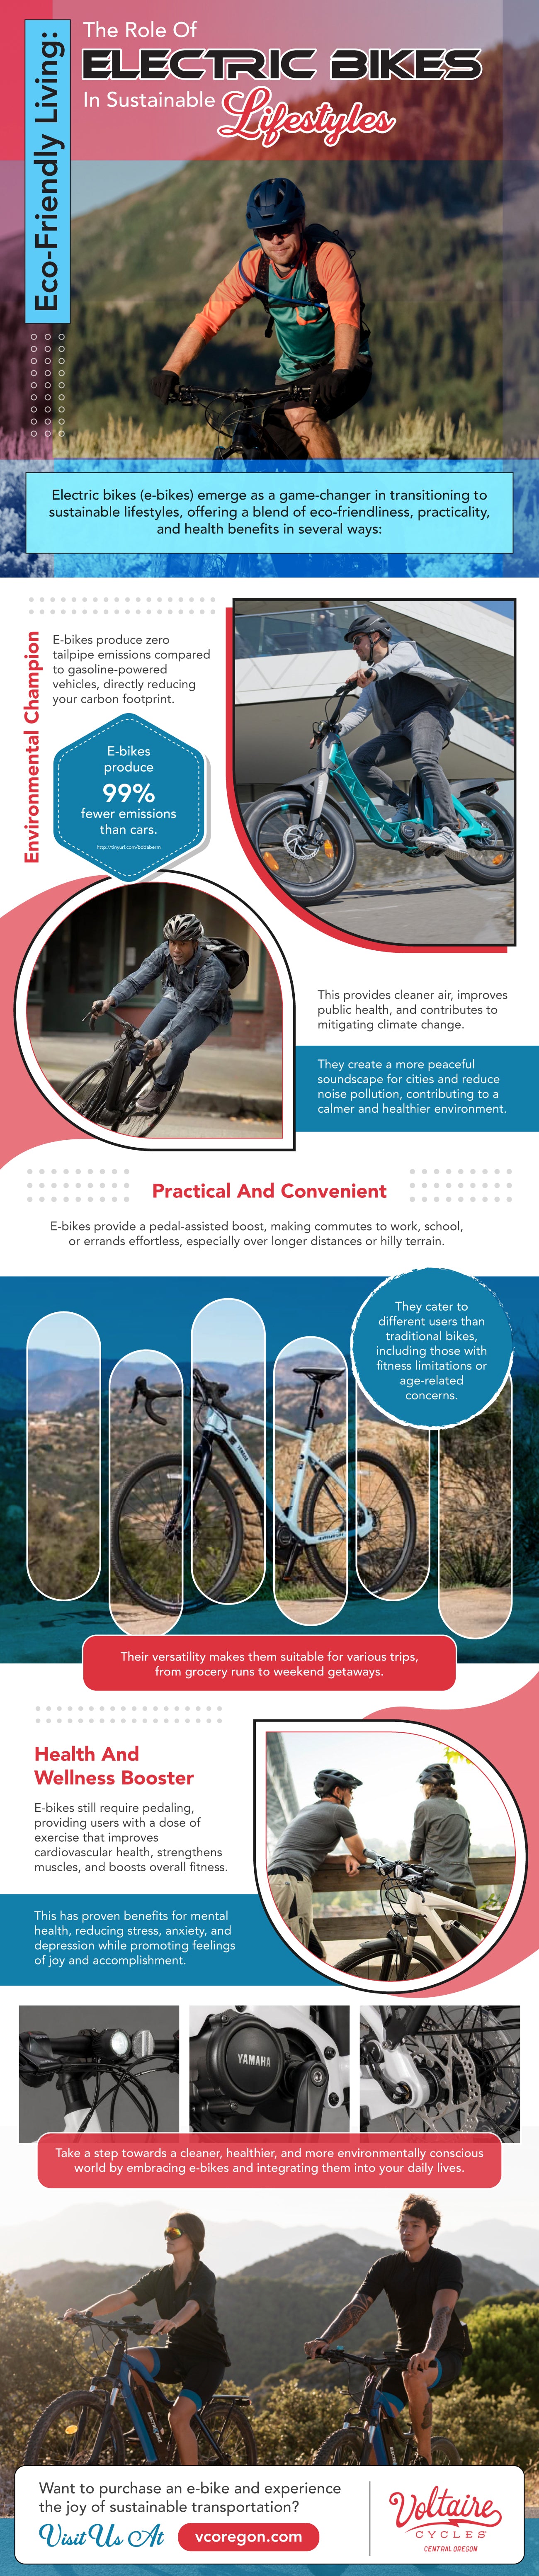 Eco-Friendly Living: The Role of Electric Bikes in Sustainable Lifestyles-INFOGRAPHIC